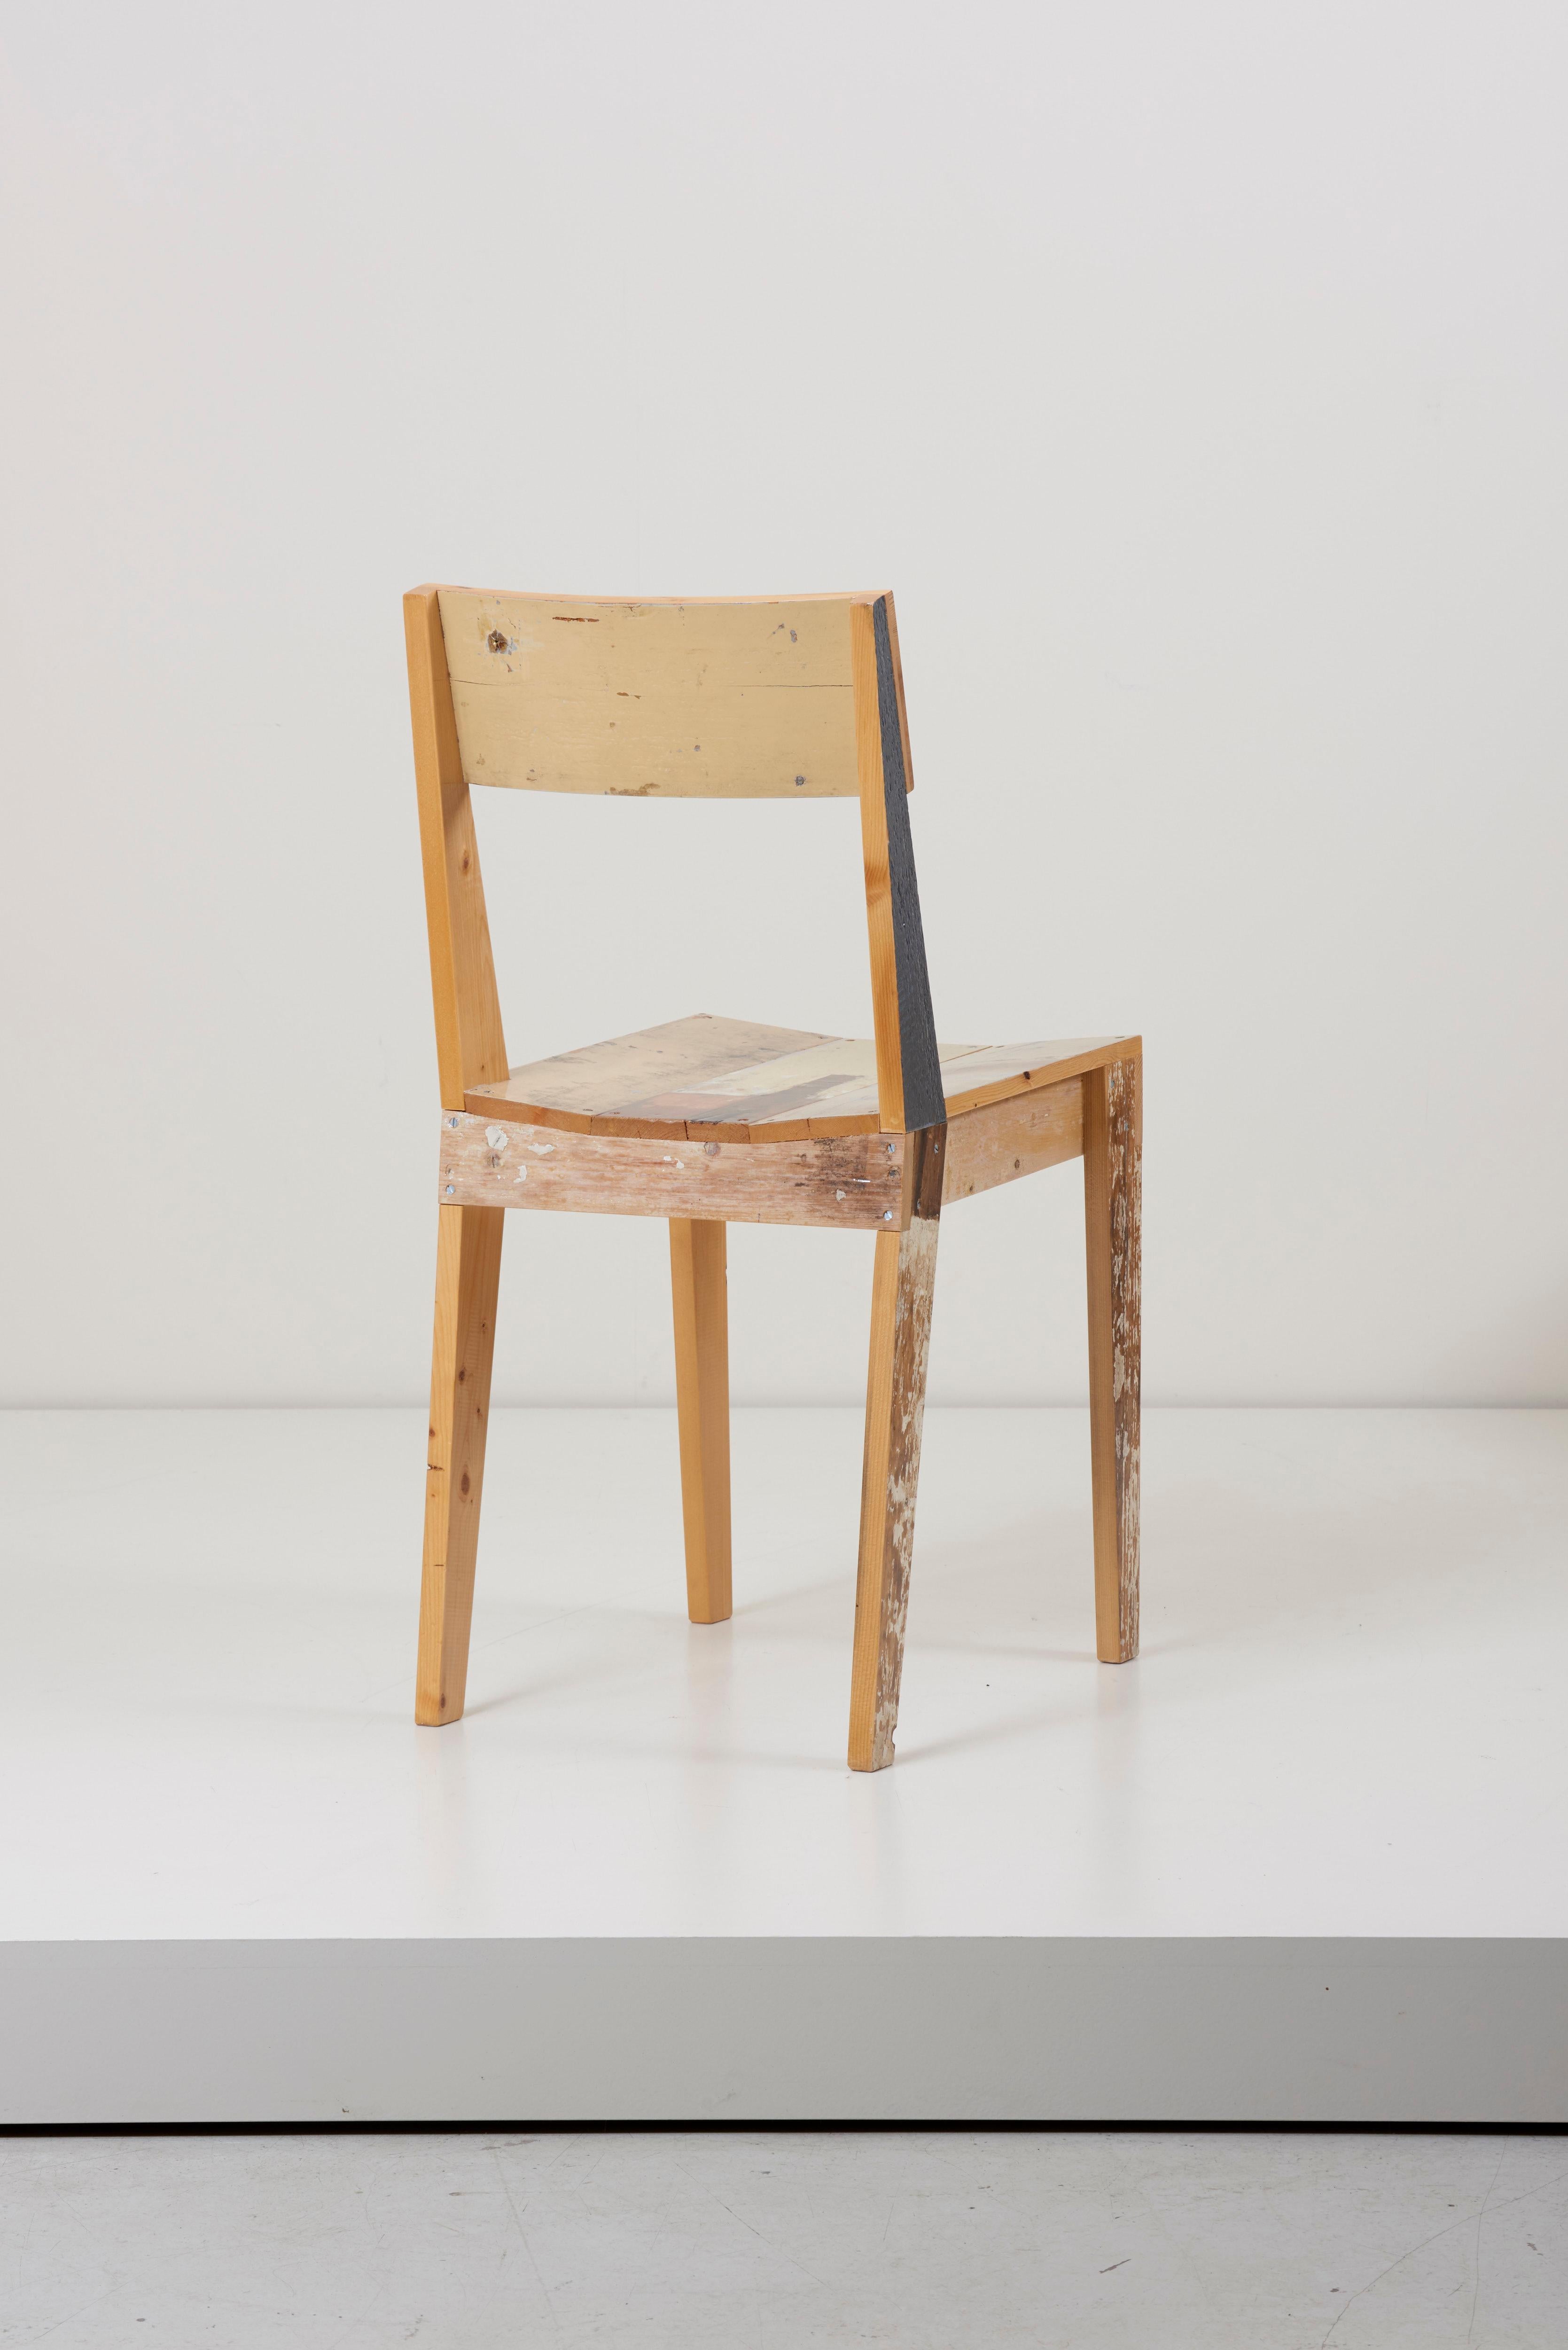 Contemporary Set of Four Lacquered Oak Chairs in Scrapwood by Piet Hein Eek